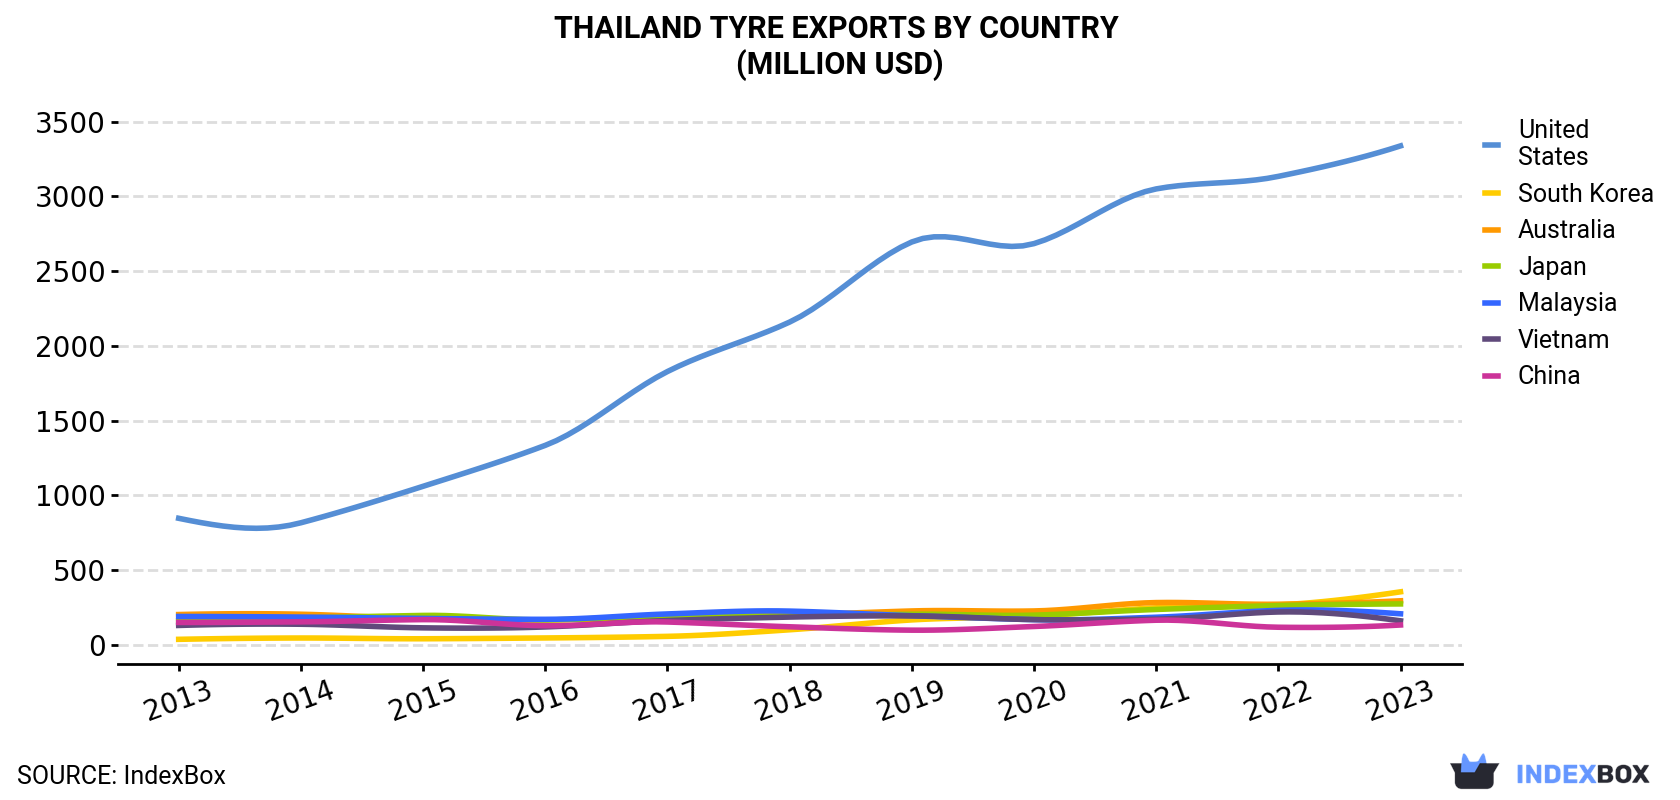 Thailand Tyre Exports By Country (Million USD)